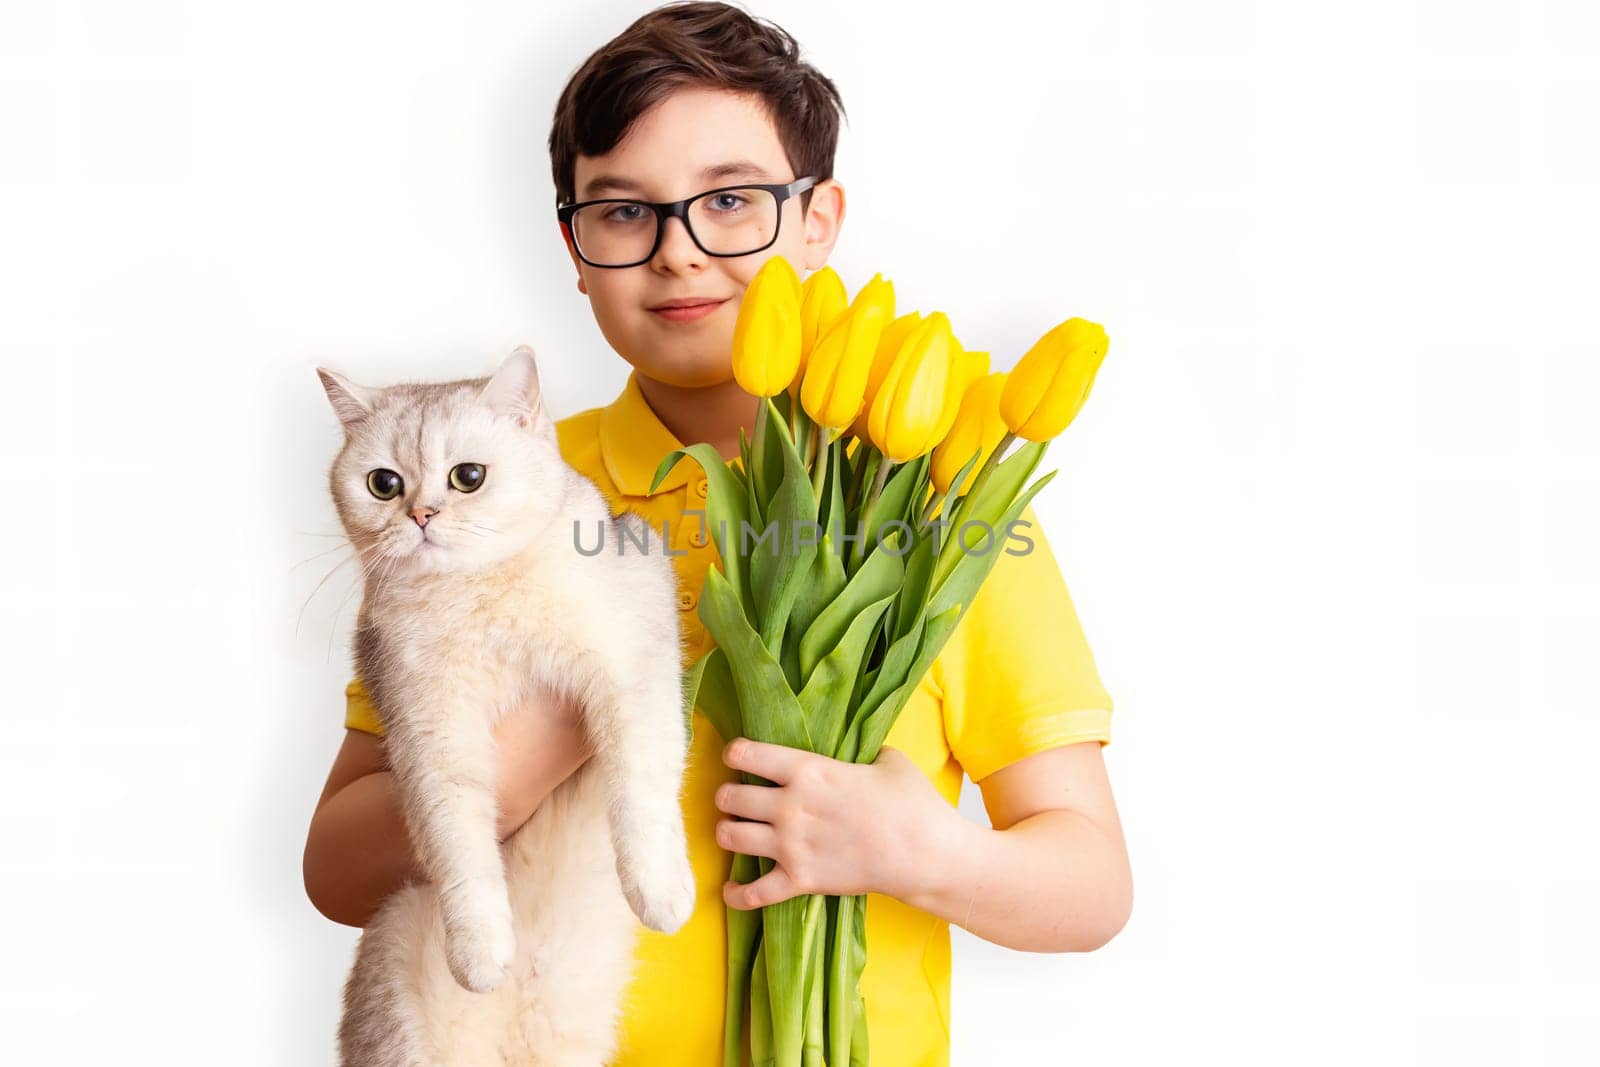 A happy cute boy in glasses and a yellow T-shirt holds a cute white cat and bouquet of yellow tulips, stands on a white background, isolated. Close up. Copy space.